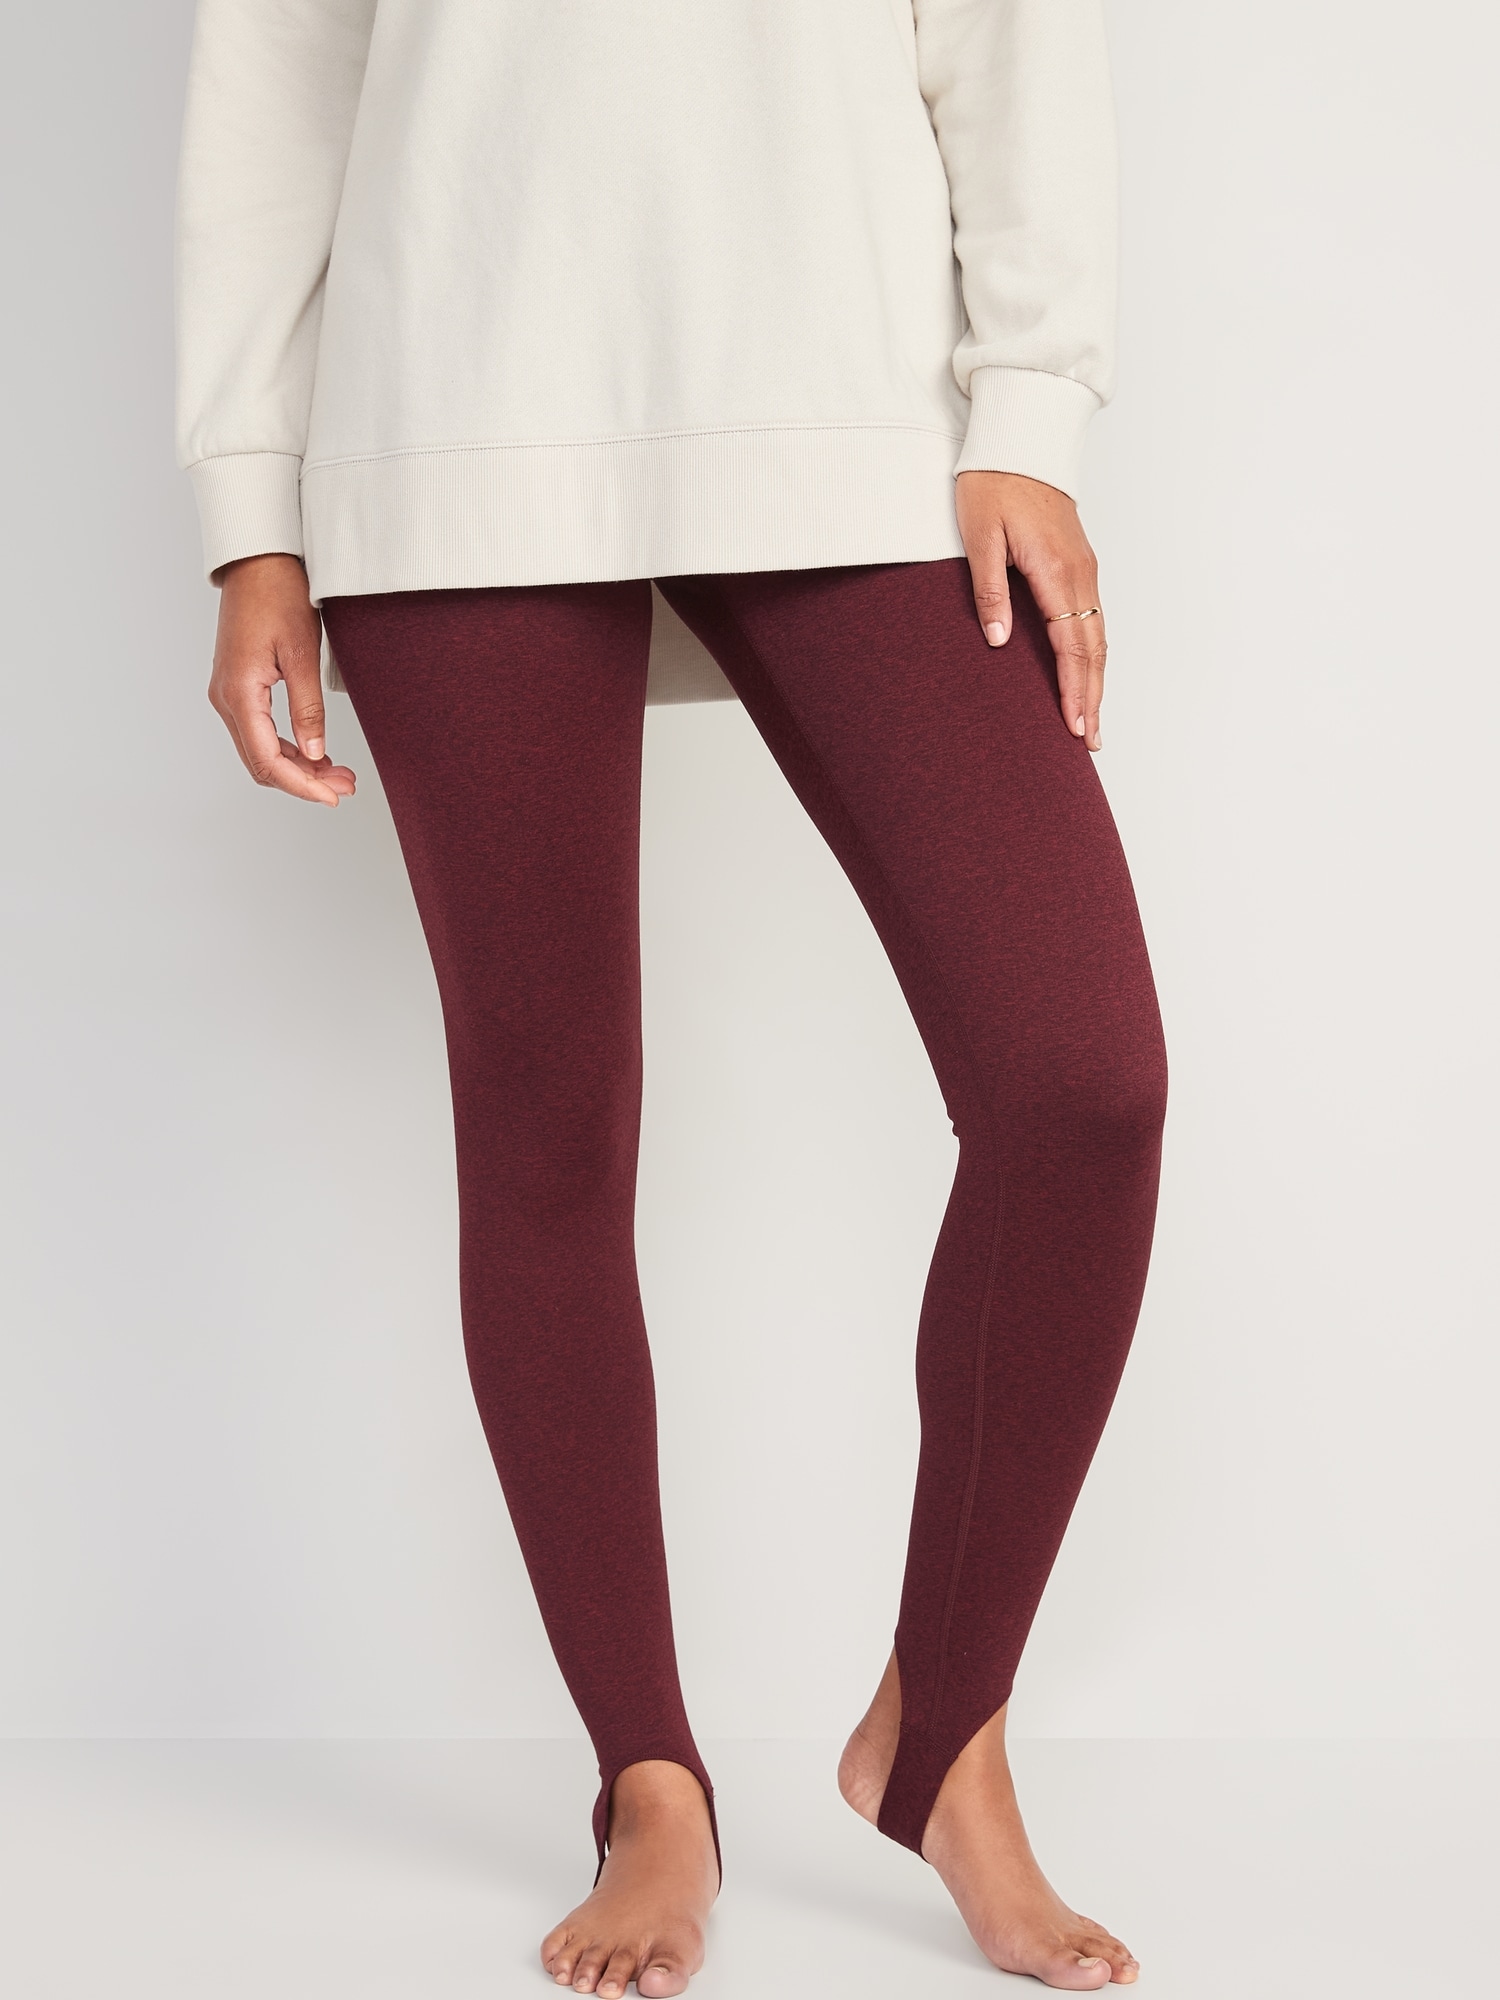 High-Waisted UltraCoze Performance Leggings for Women | Old Navy